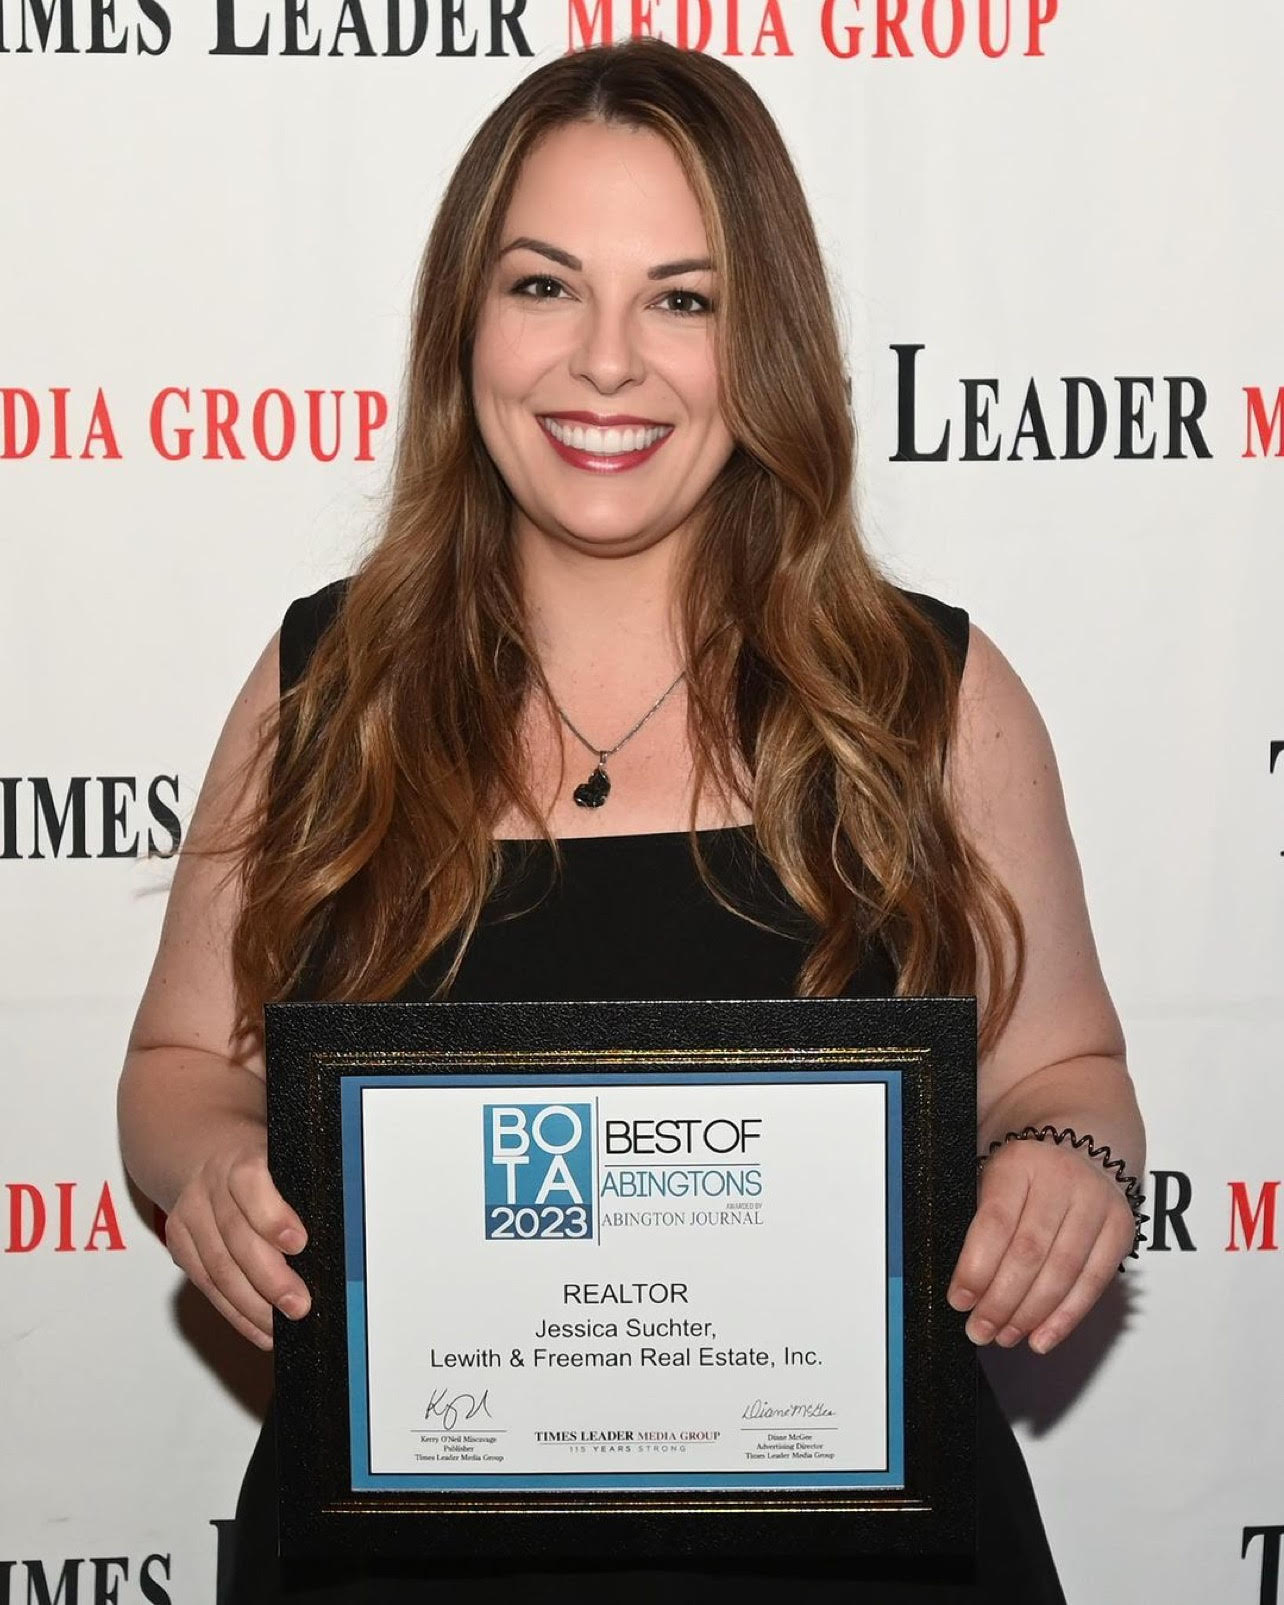 Jessica Suchter Voted Best Realtor in The Abingtons